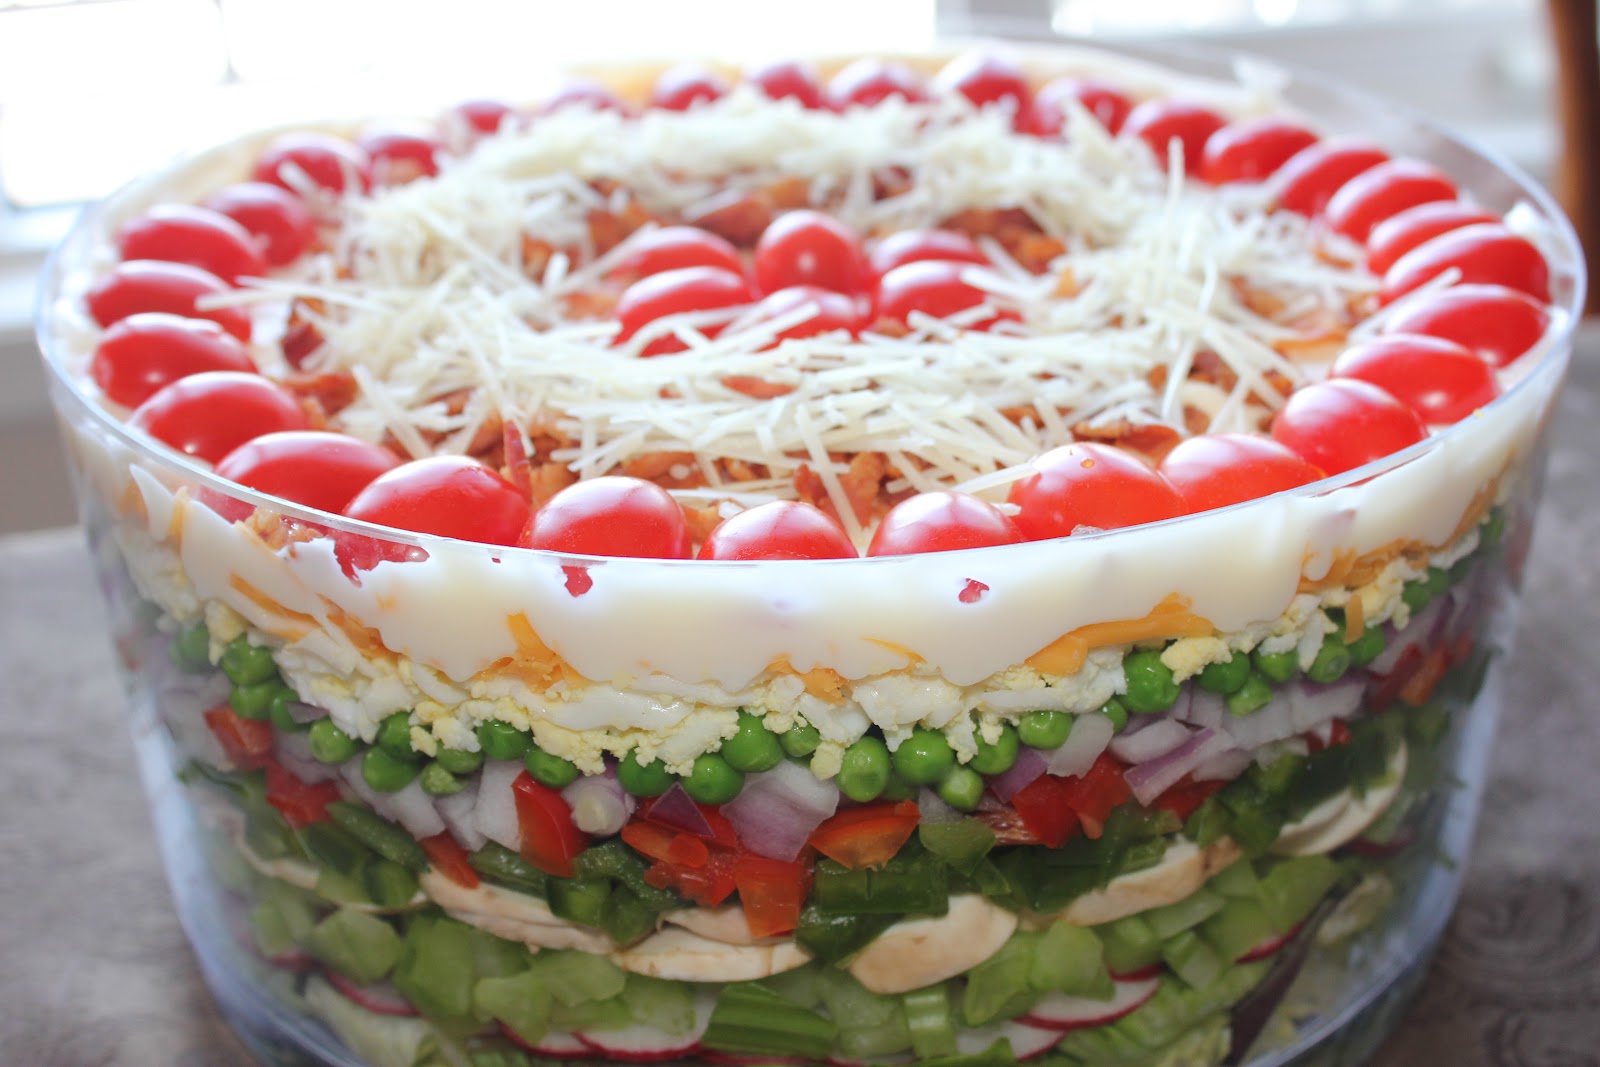 Sisters Luv 2 Cook: Betty's Layered Salad